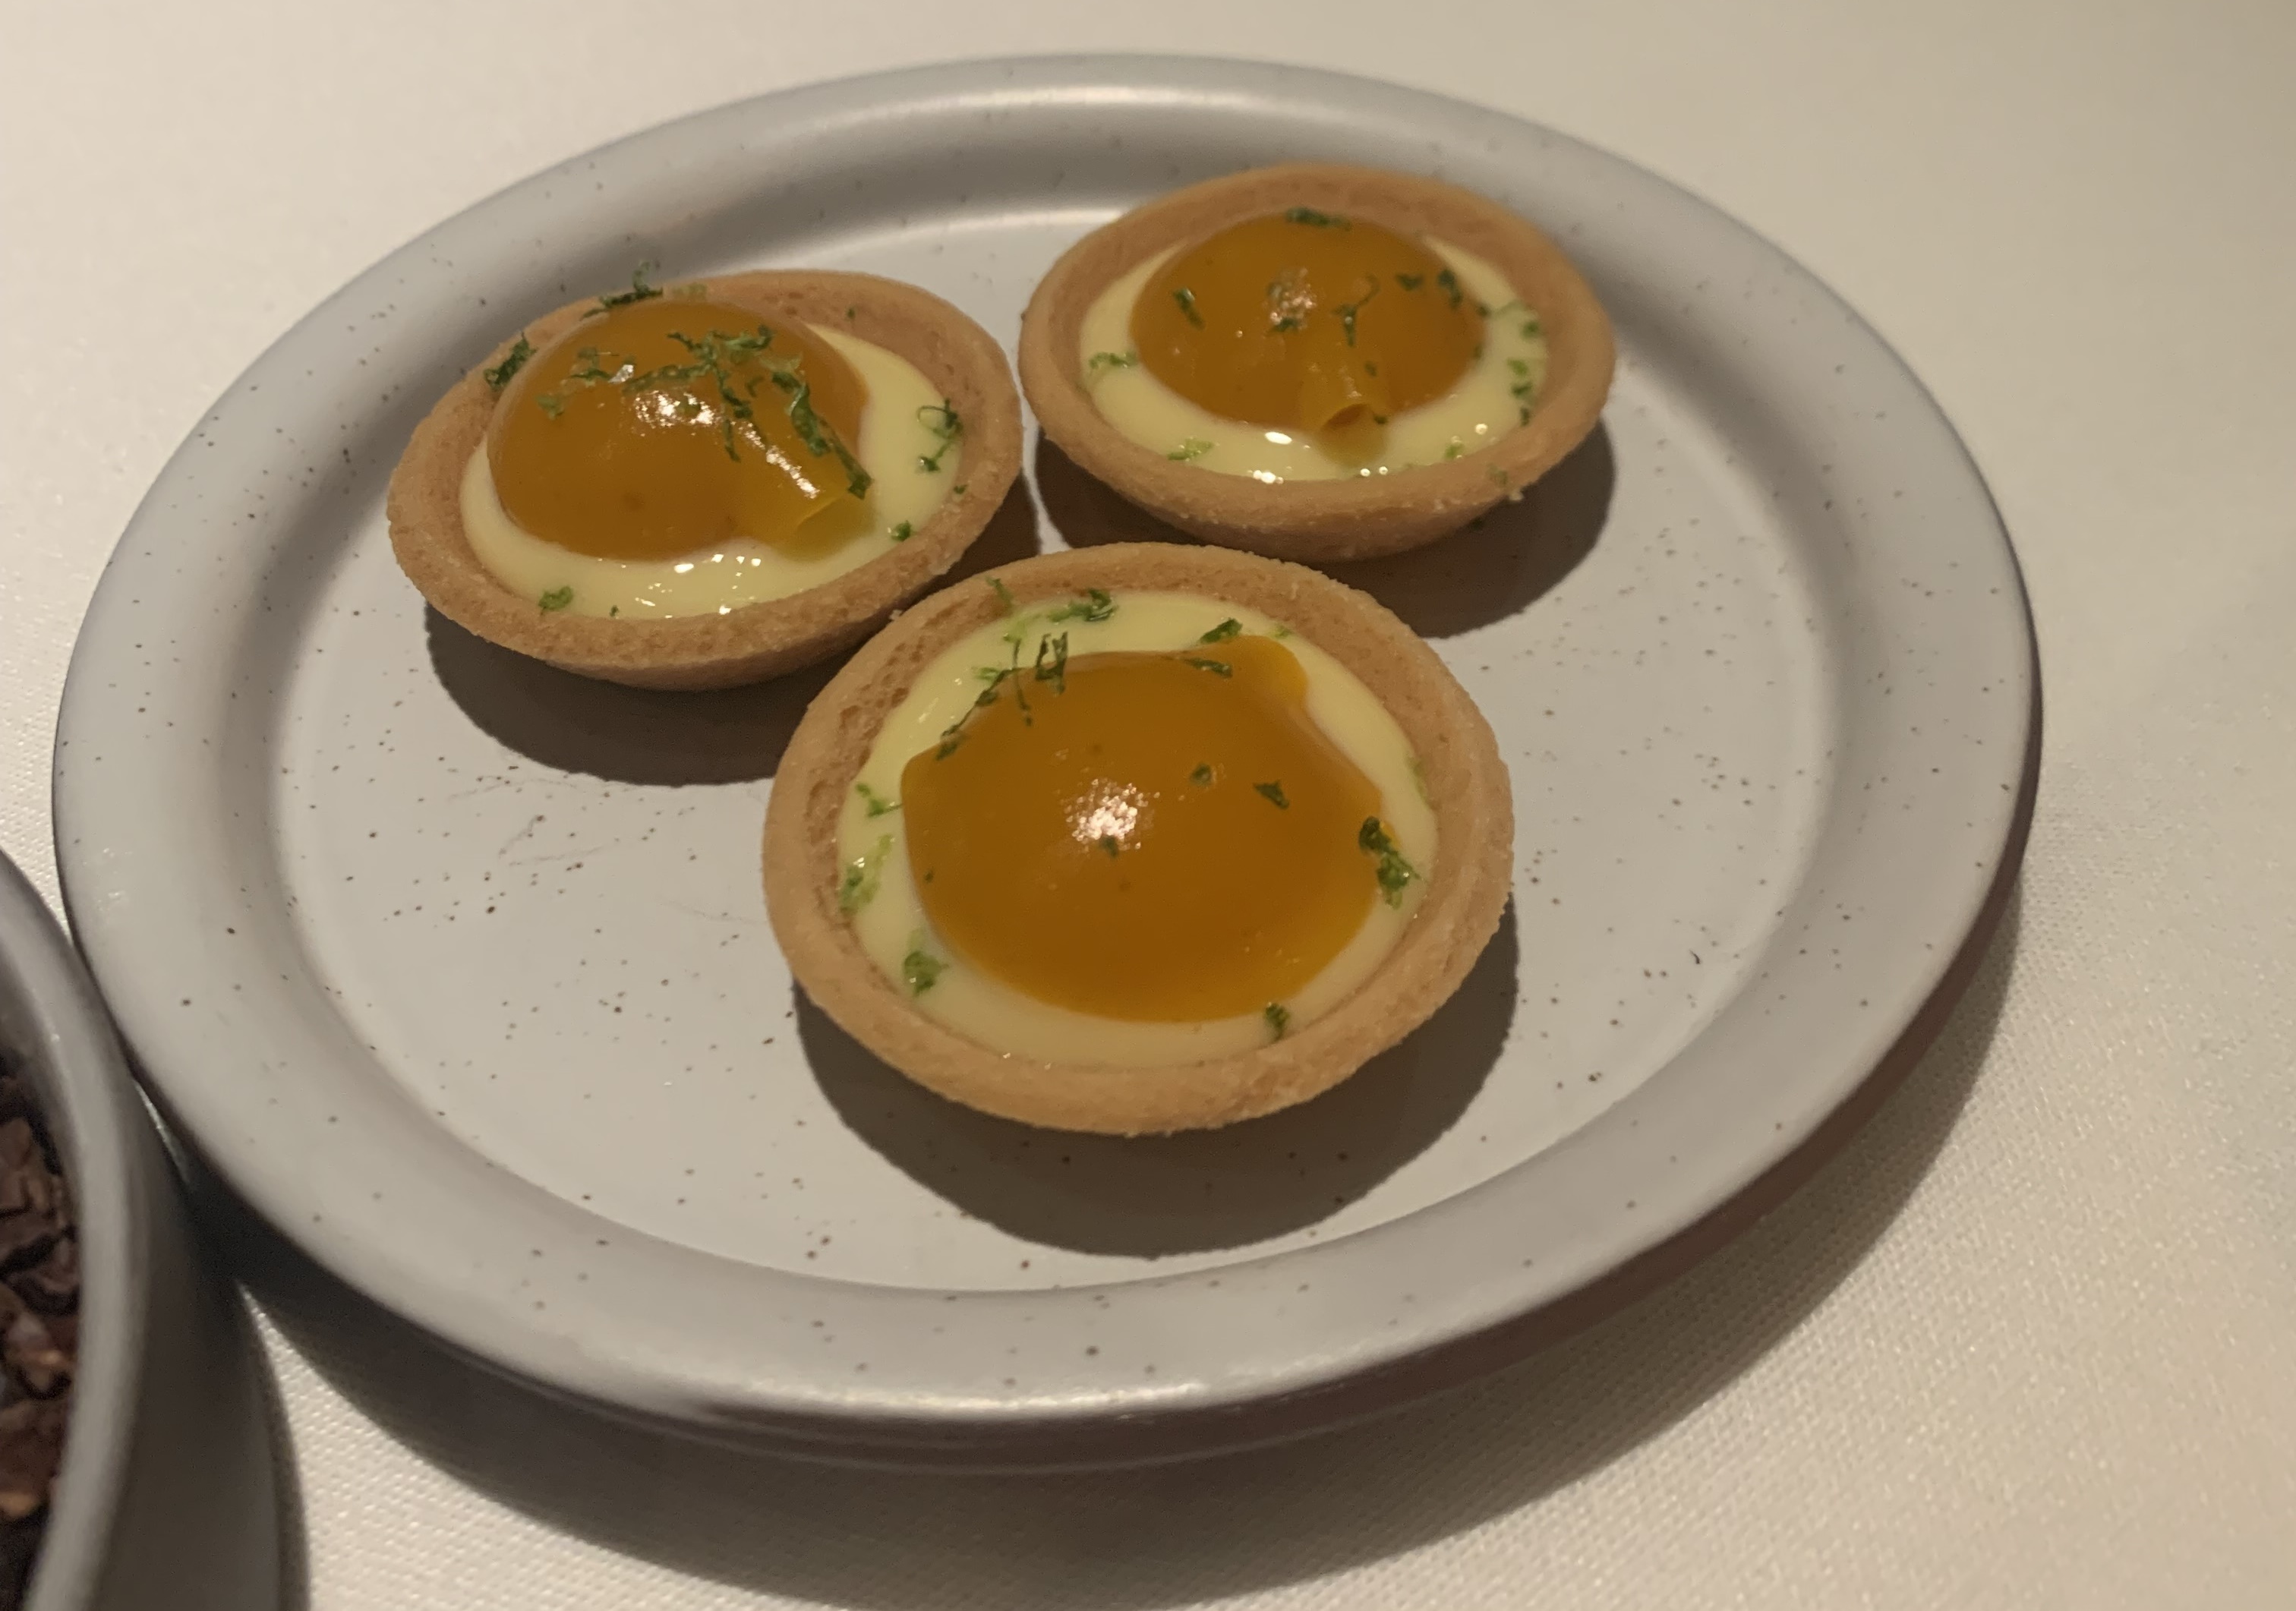 Plate with three round tartlet shells, each filled with a traditional-looking pale-yellow pastry cream. On top of the cream is a smooth, rounded mound of an orange gel. The whole thing looks a bit like an egg cracked into a tart shell.